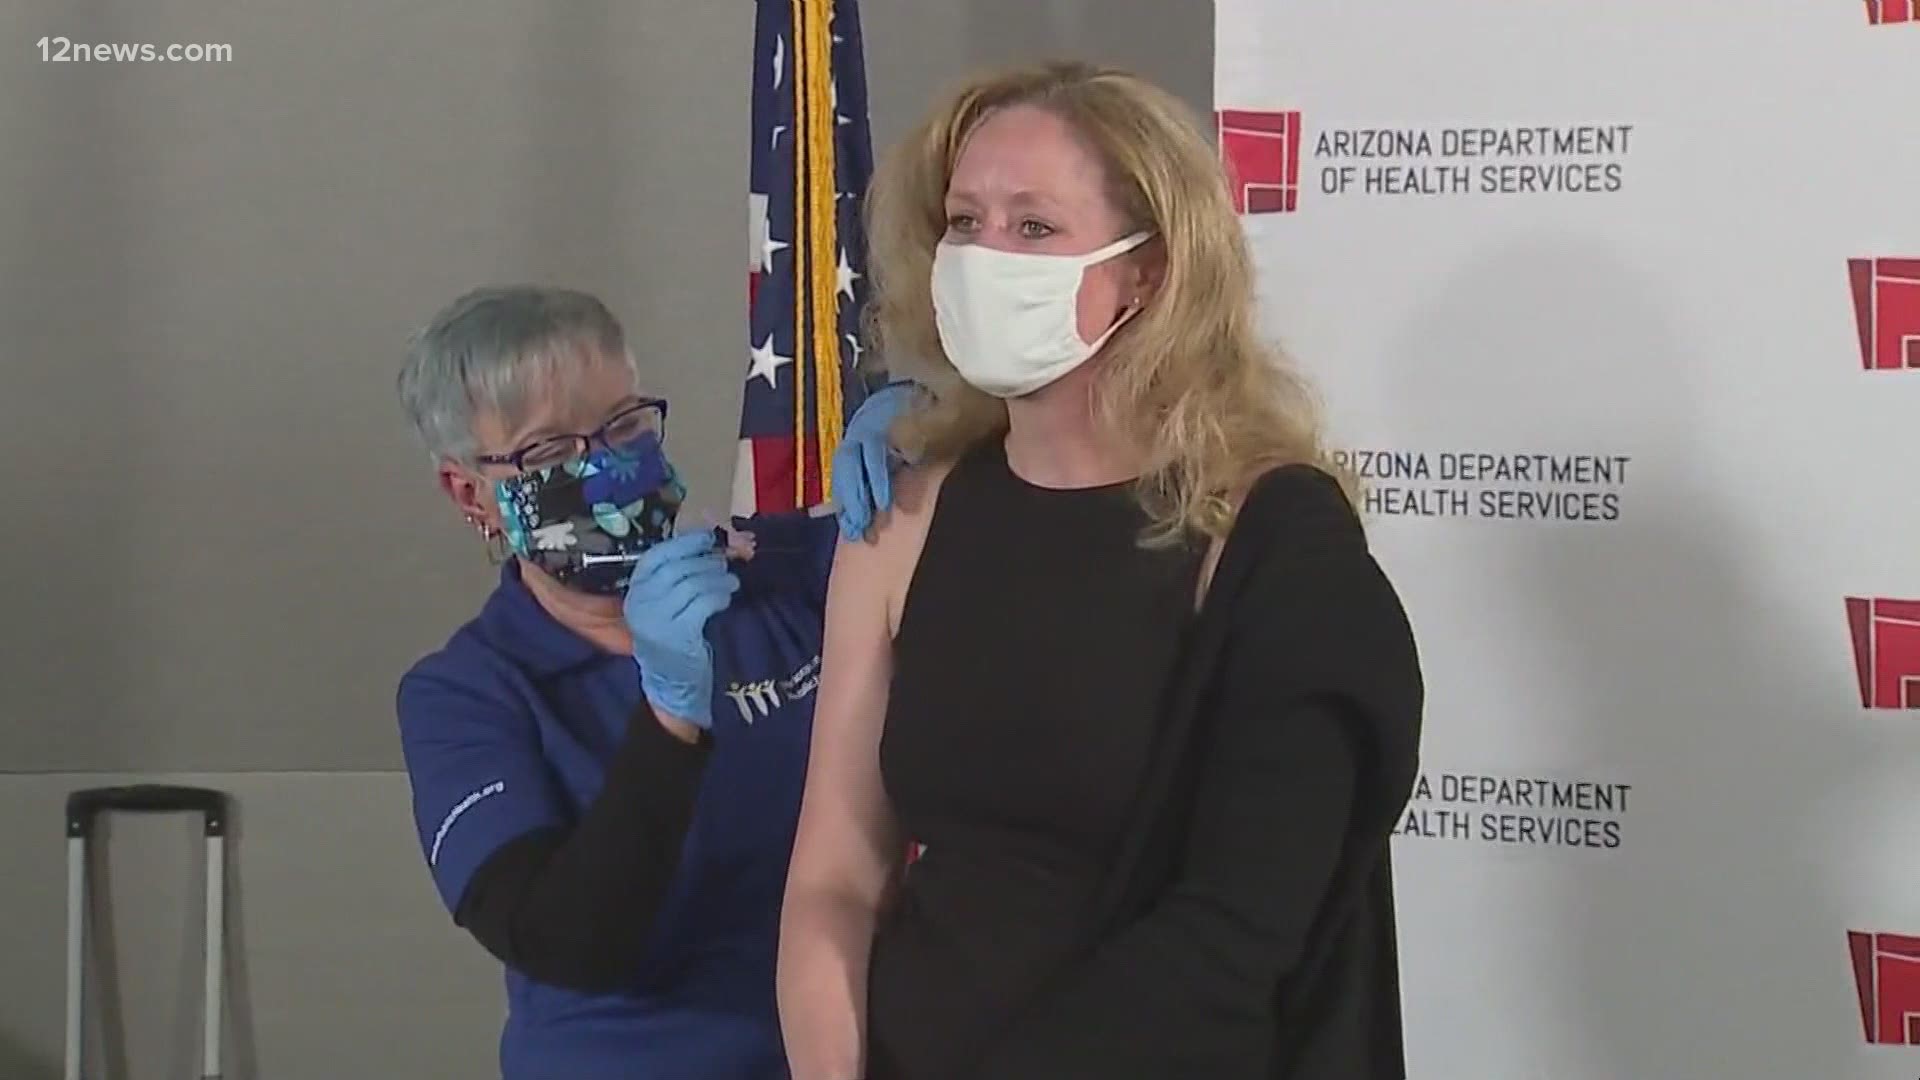 On Wednesday evening, some Arizona health care workers, including ADHS Director Dr. Cara Christ, will be among the first to receive the vaccine.